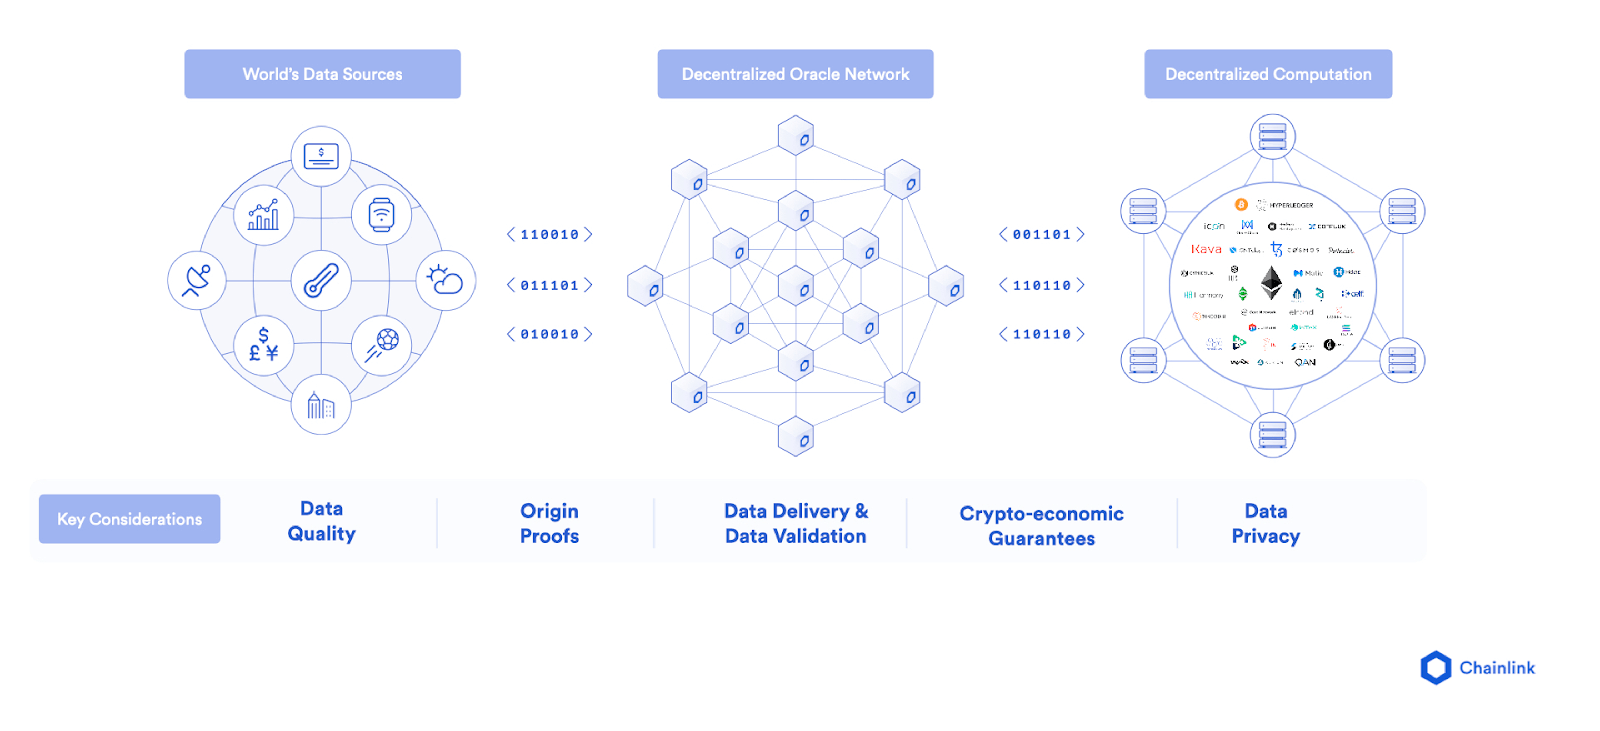 Decentralized Oracle Networks